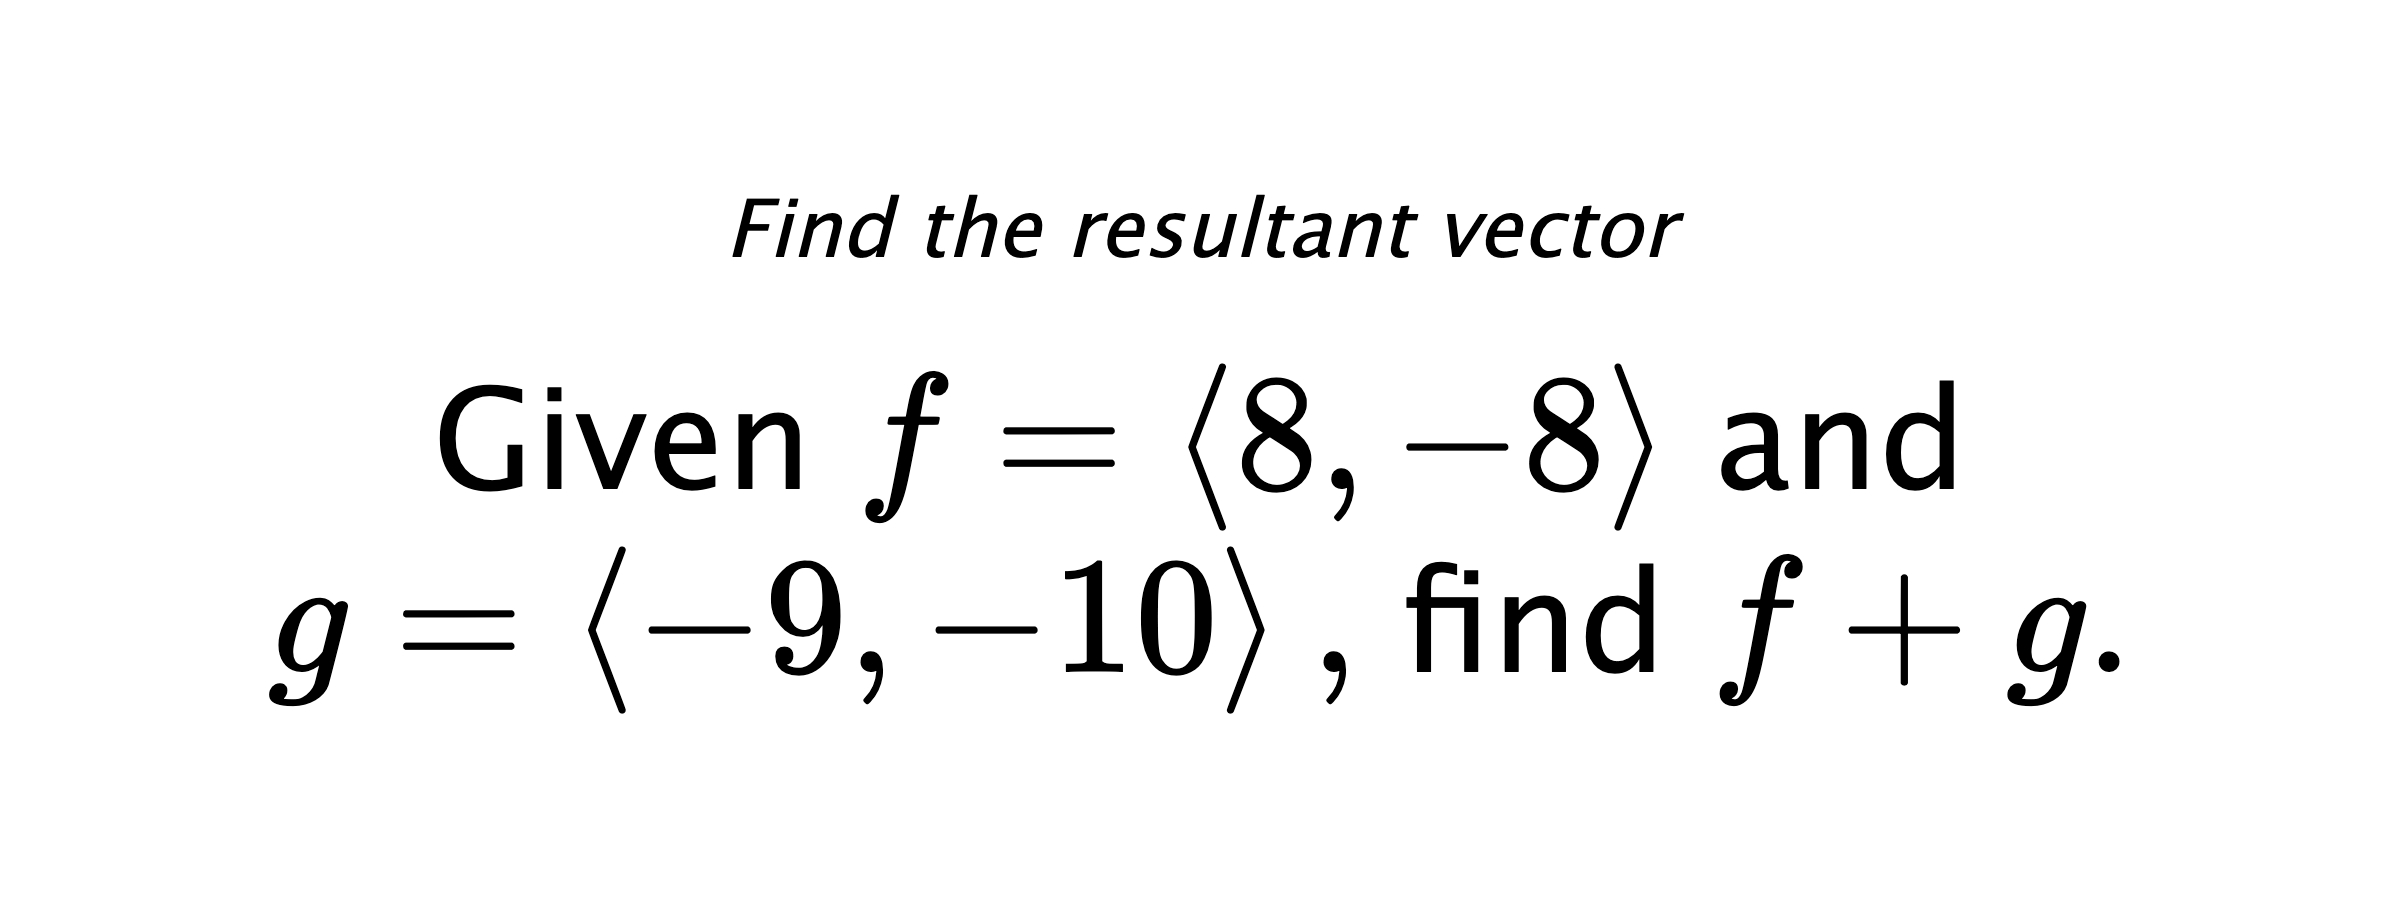 Find the resultant vector Given $ f = \left< 8,-8 \right> $ and $ g = \left< -9,-10 \right> ,$ find $ f+g .$